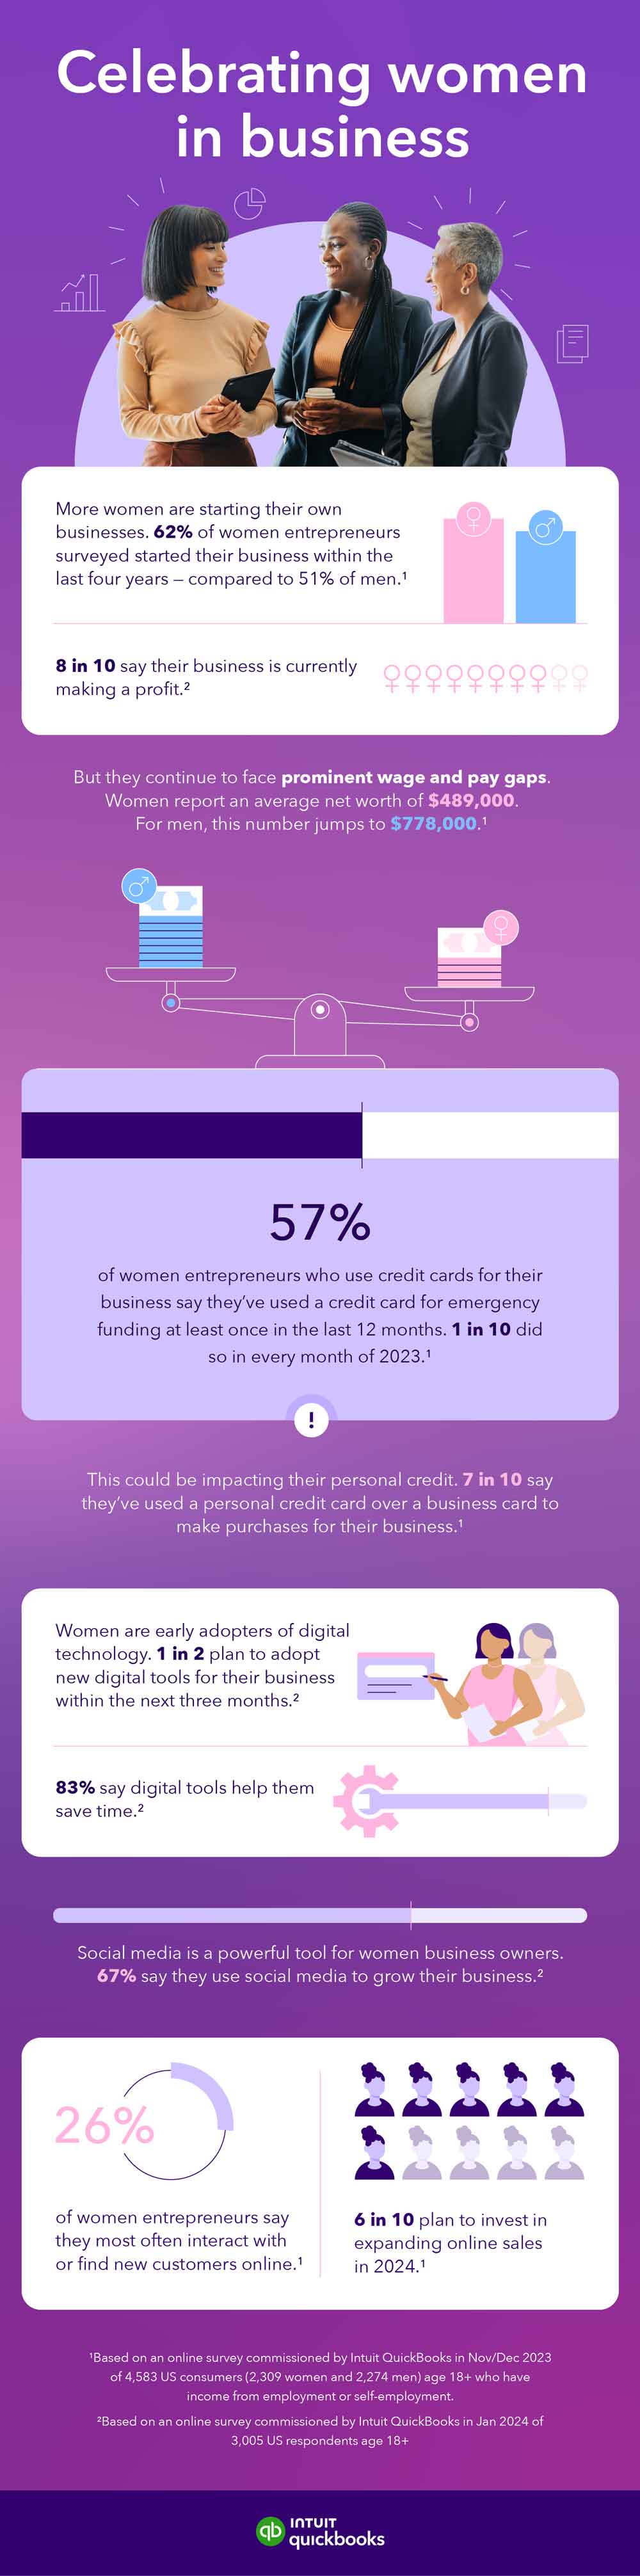 Celebrating women in business, an infographic